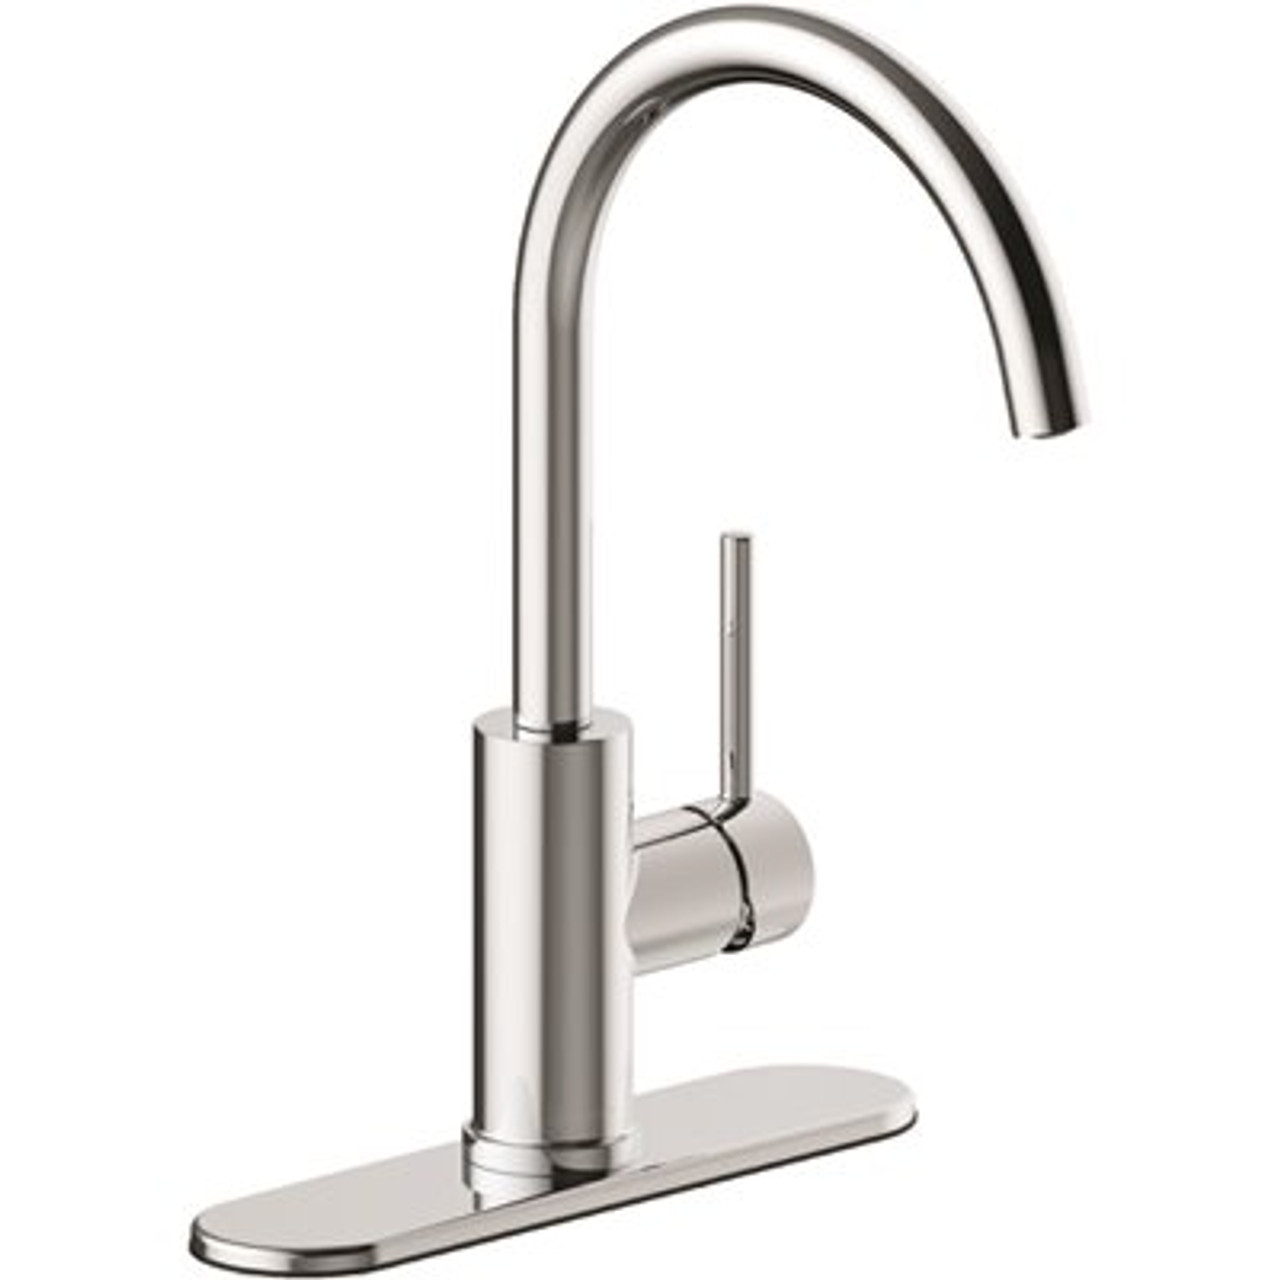 Westwind Single-Handle Standard Kitchen Faucet in Chrome